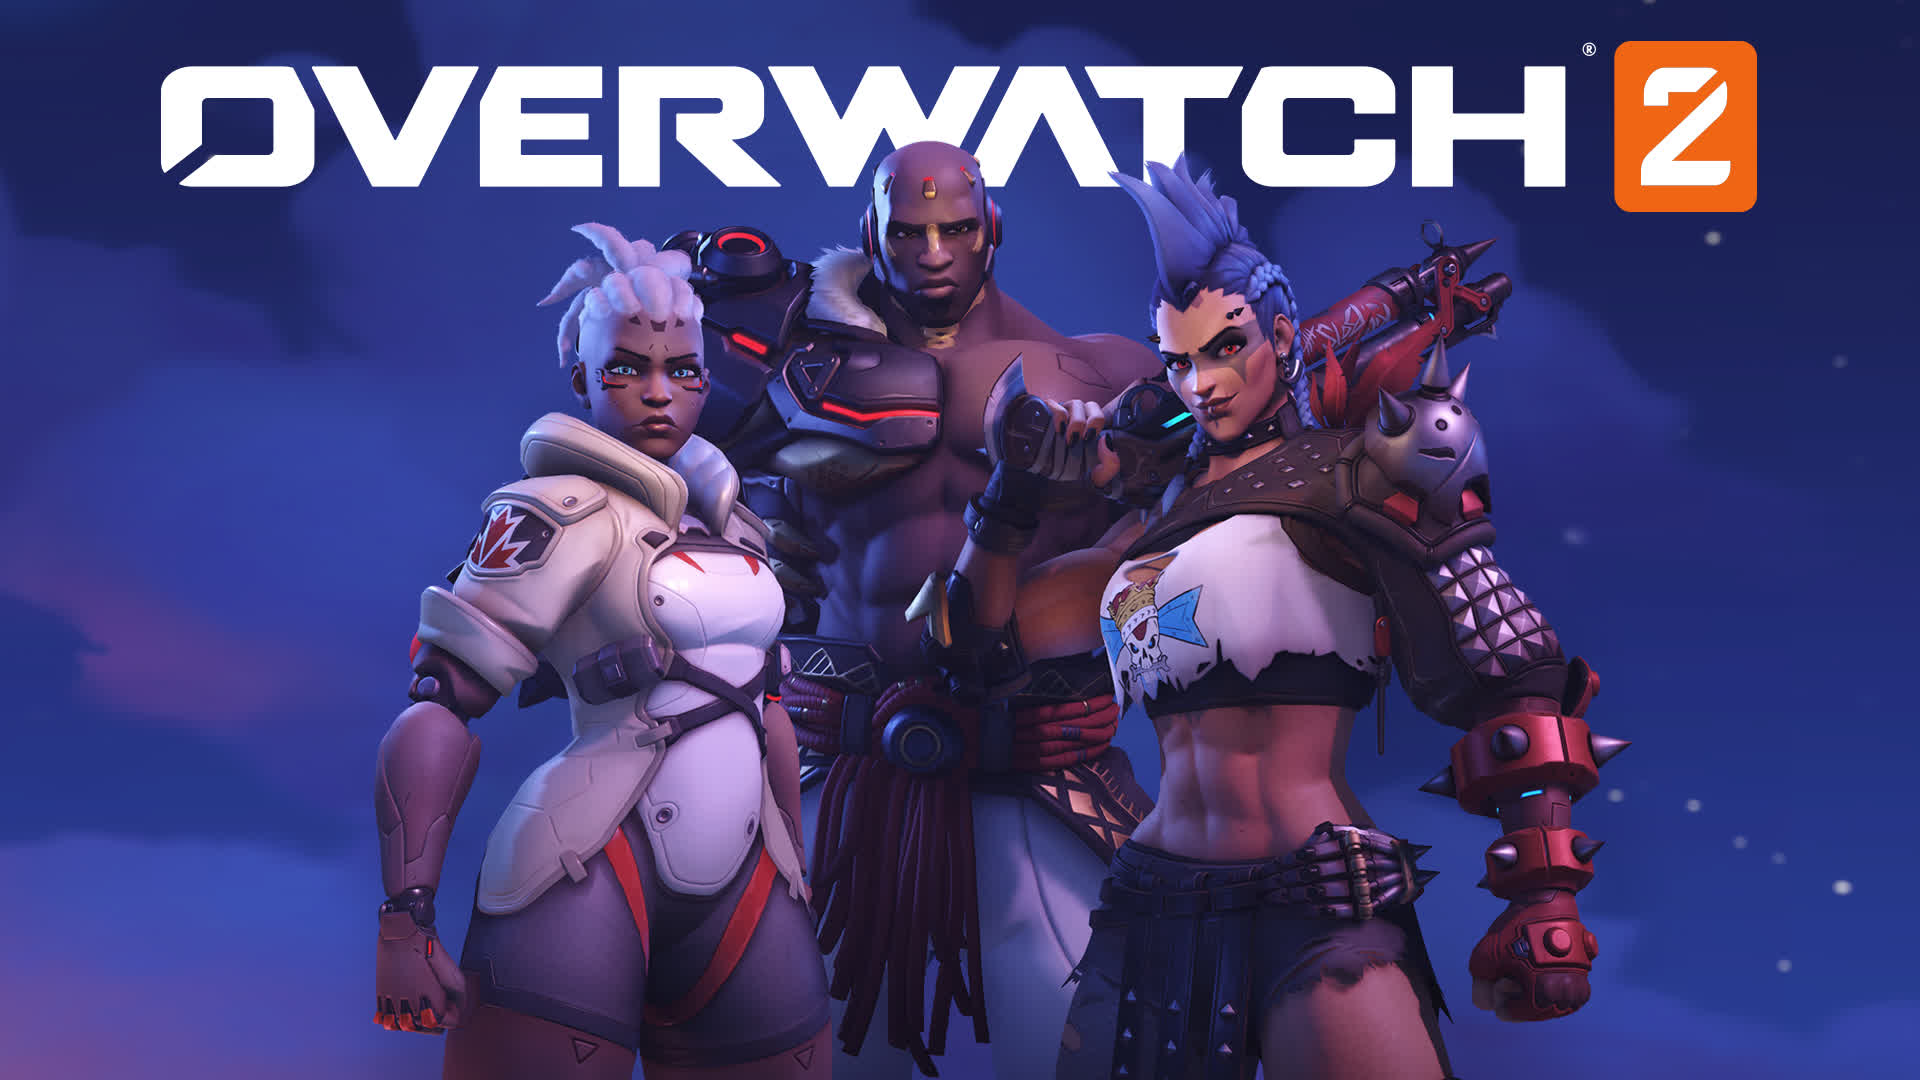 Overwatch 2 coming to Steam on August 10, more Blizzard games to follow